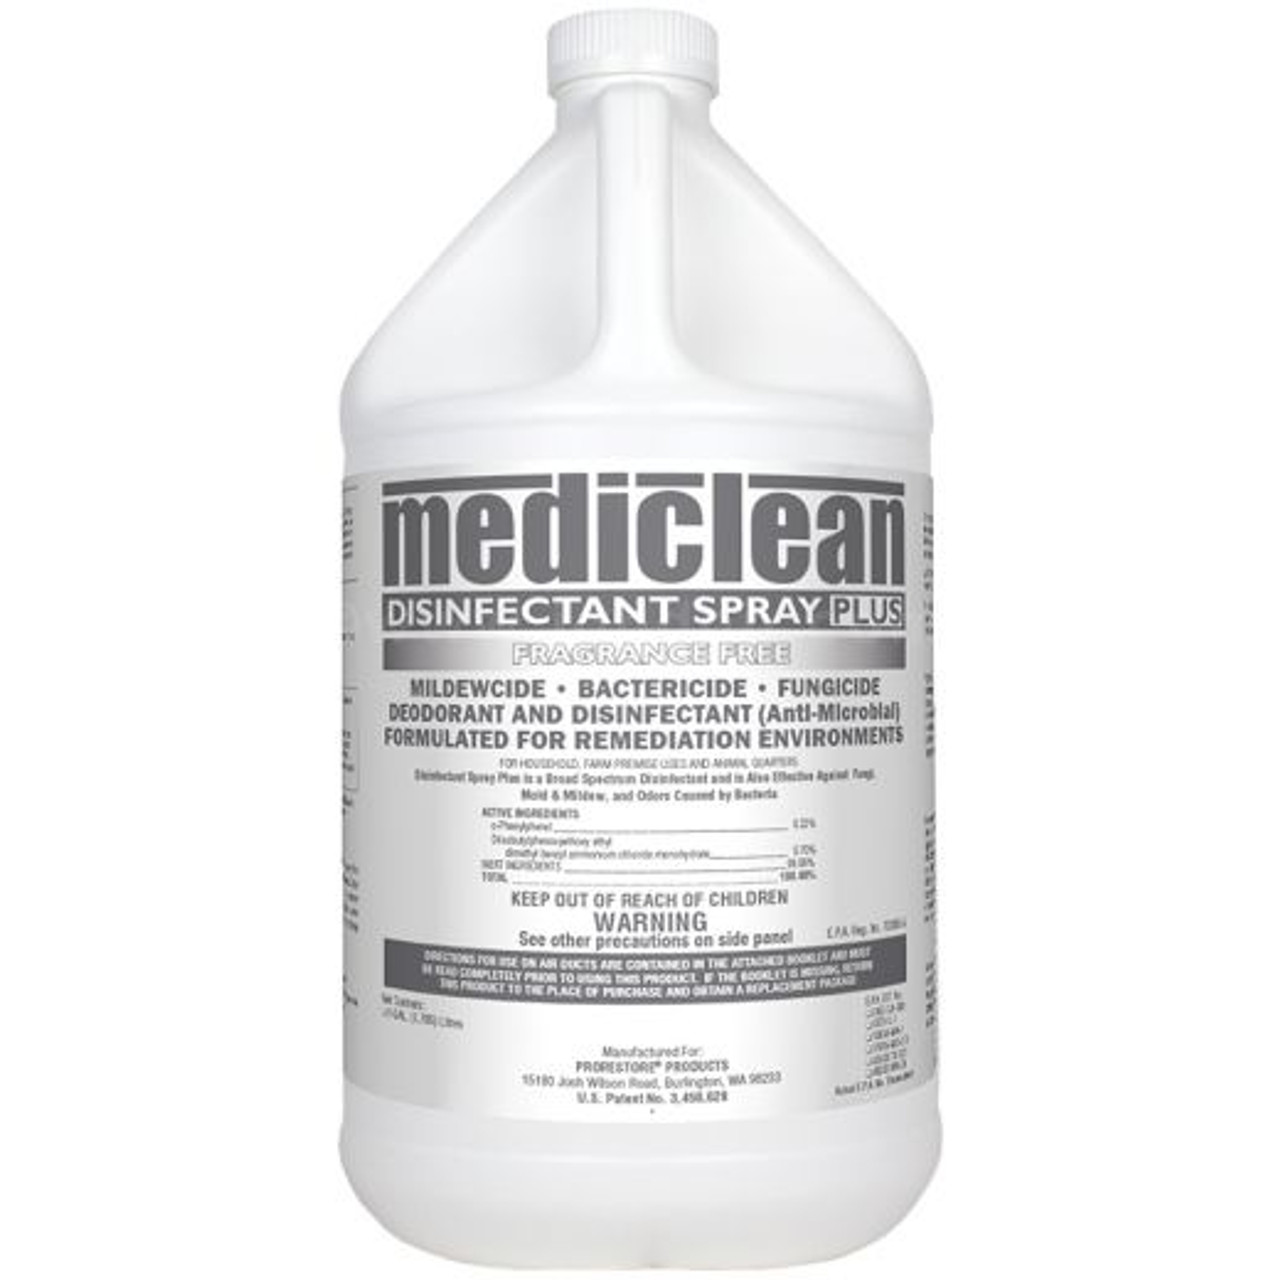 Mediclean Disinfectant Spray Plus Fragrance Free - 1gal - CASE of 4ea